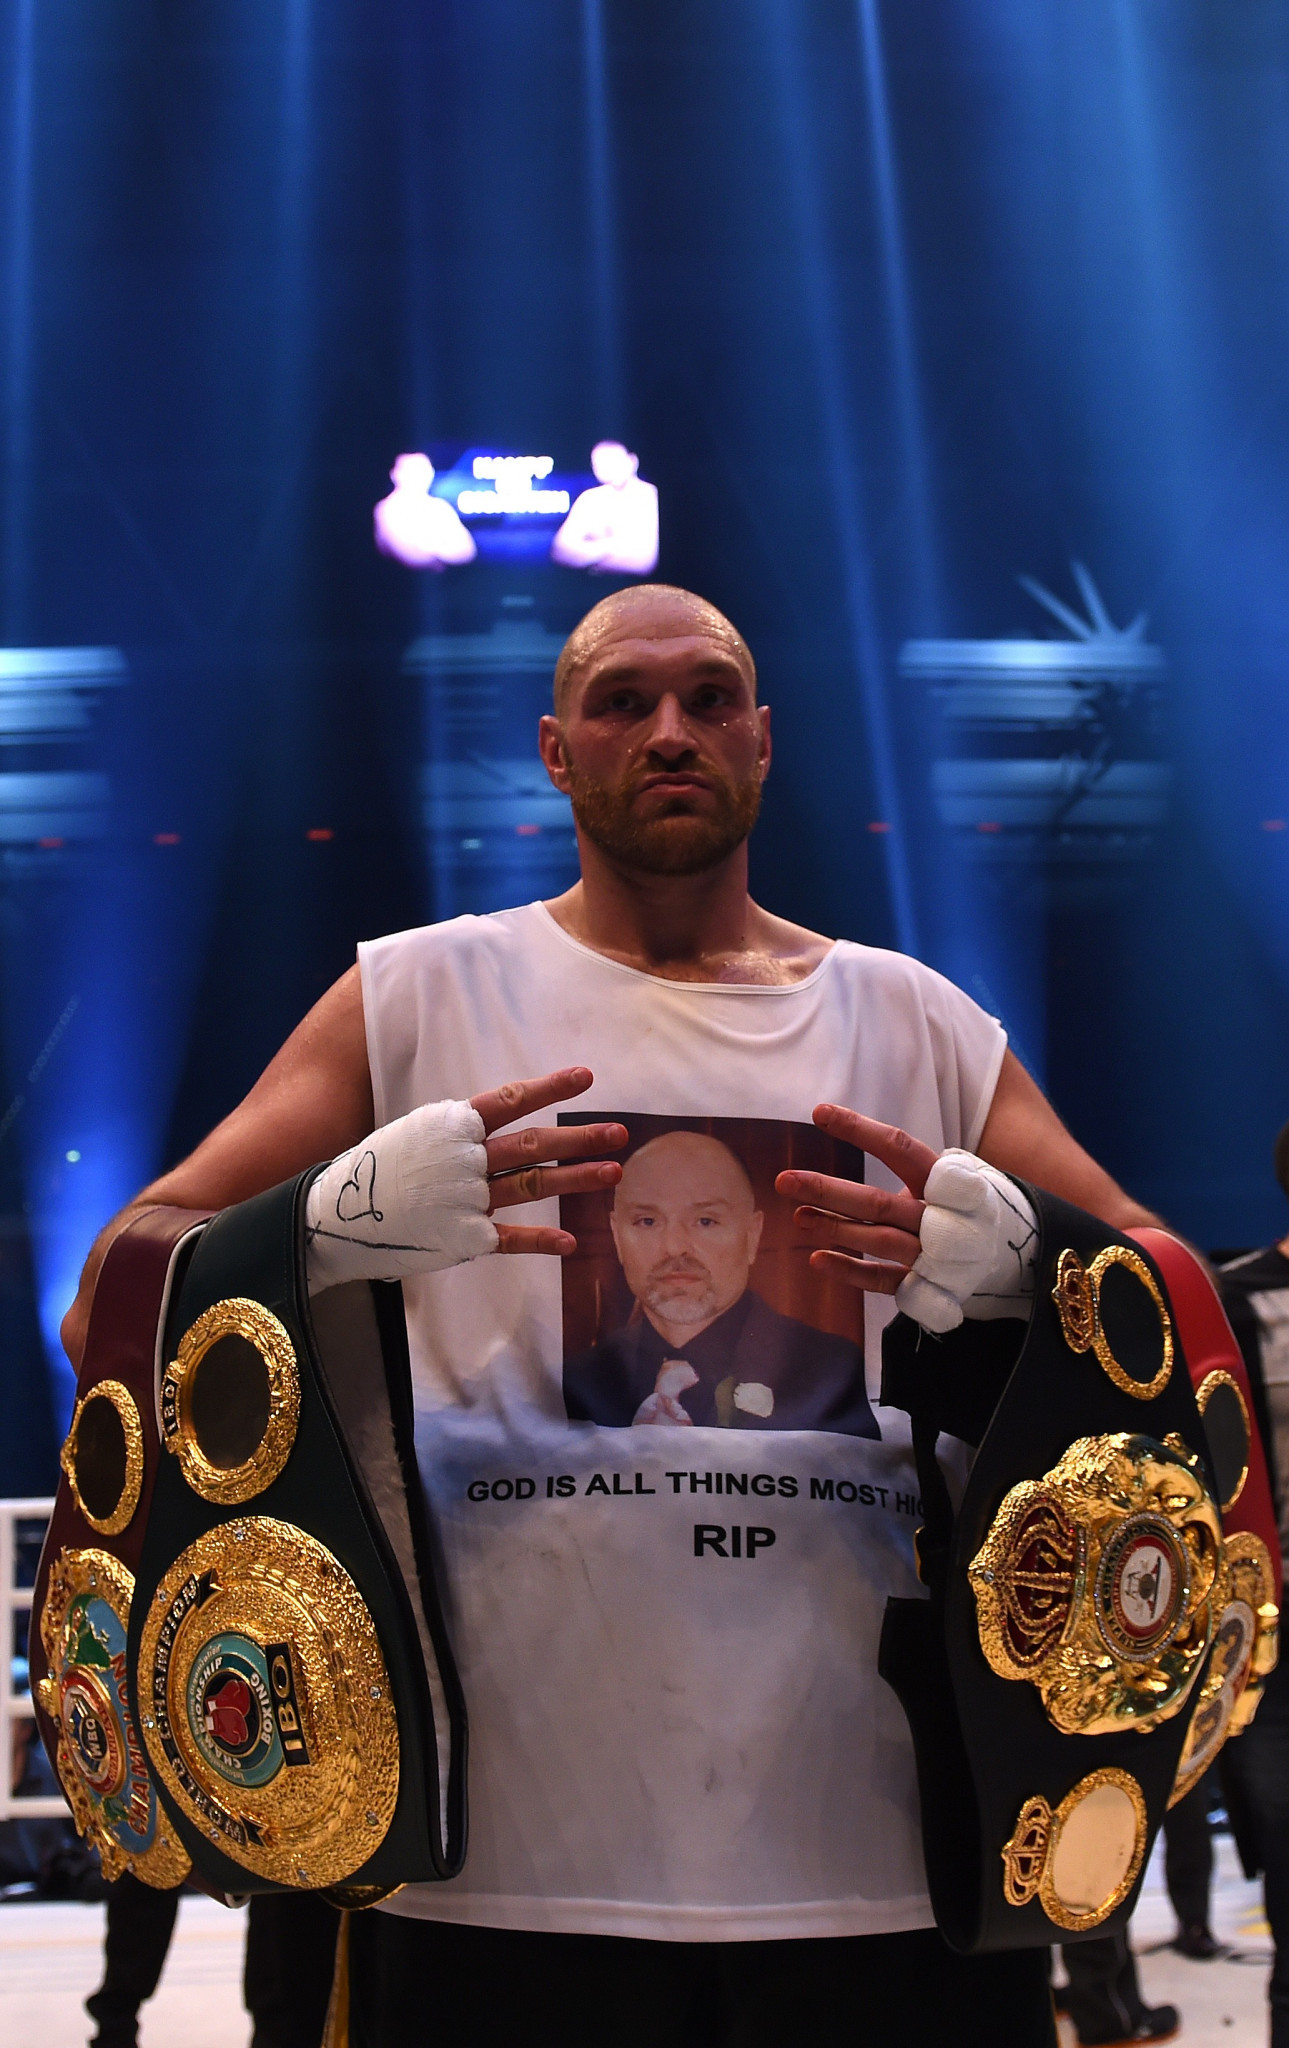 Tyson Fury celebrates winning the world heavyweight boxing title for the first time in 2015, but it later emerged he had tested positive for banned anabolic steroids before the fight ©Getty Images